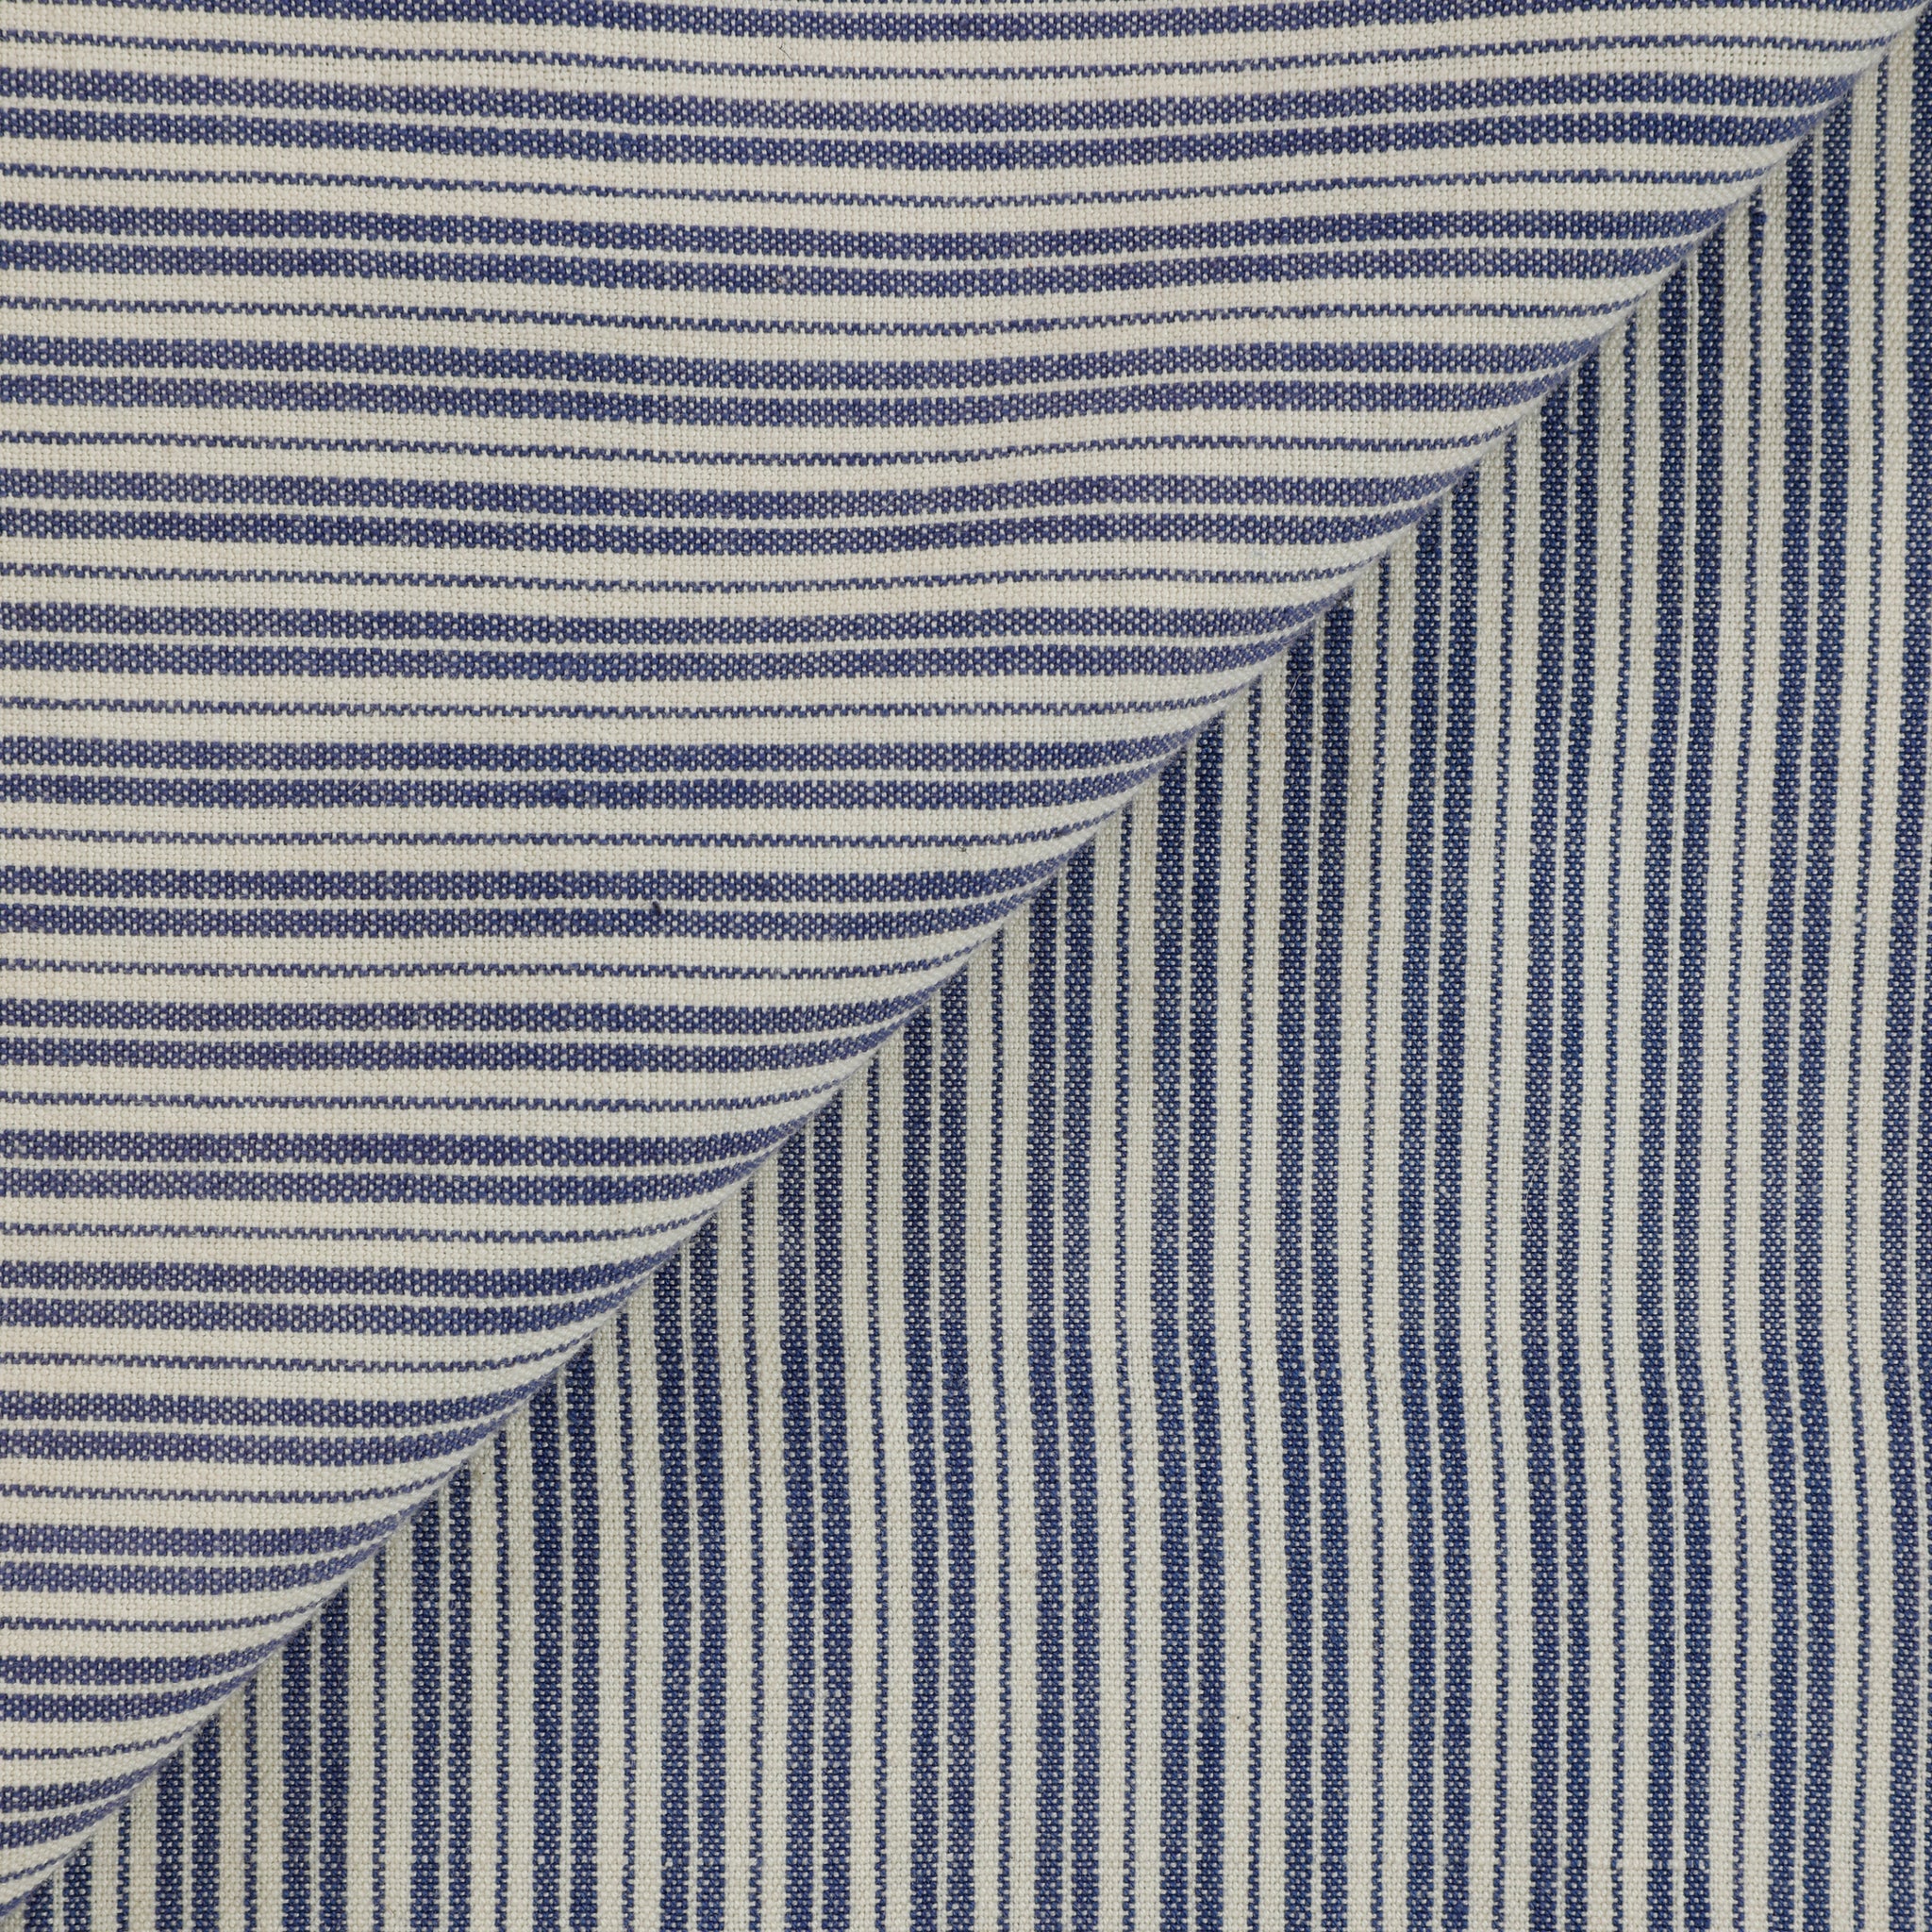 VINTAGE STRIPED TABLECLOTH